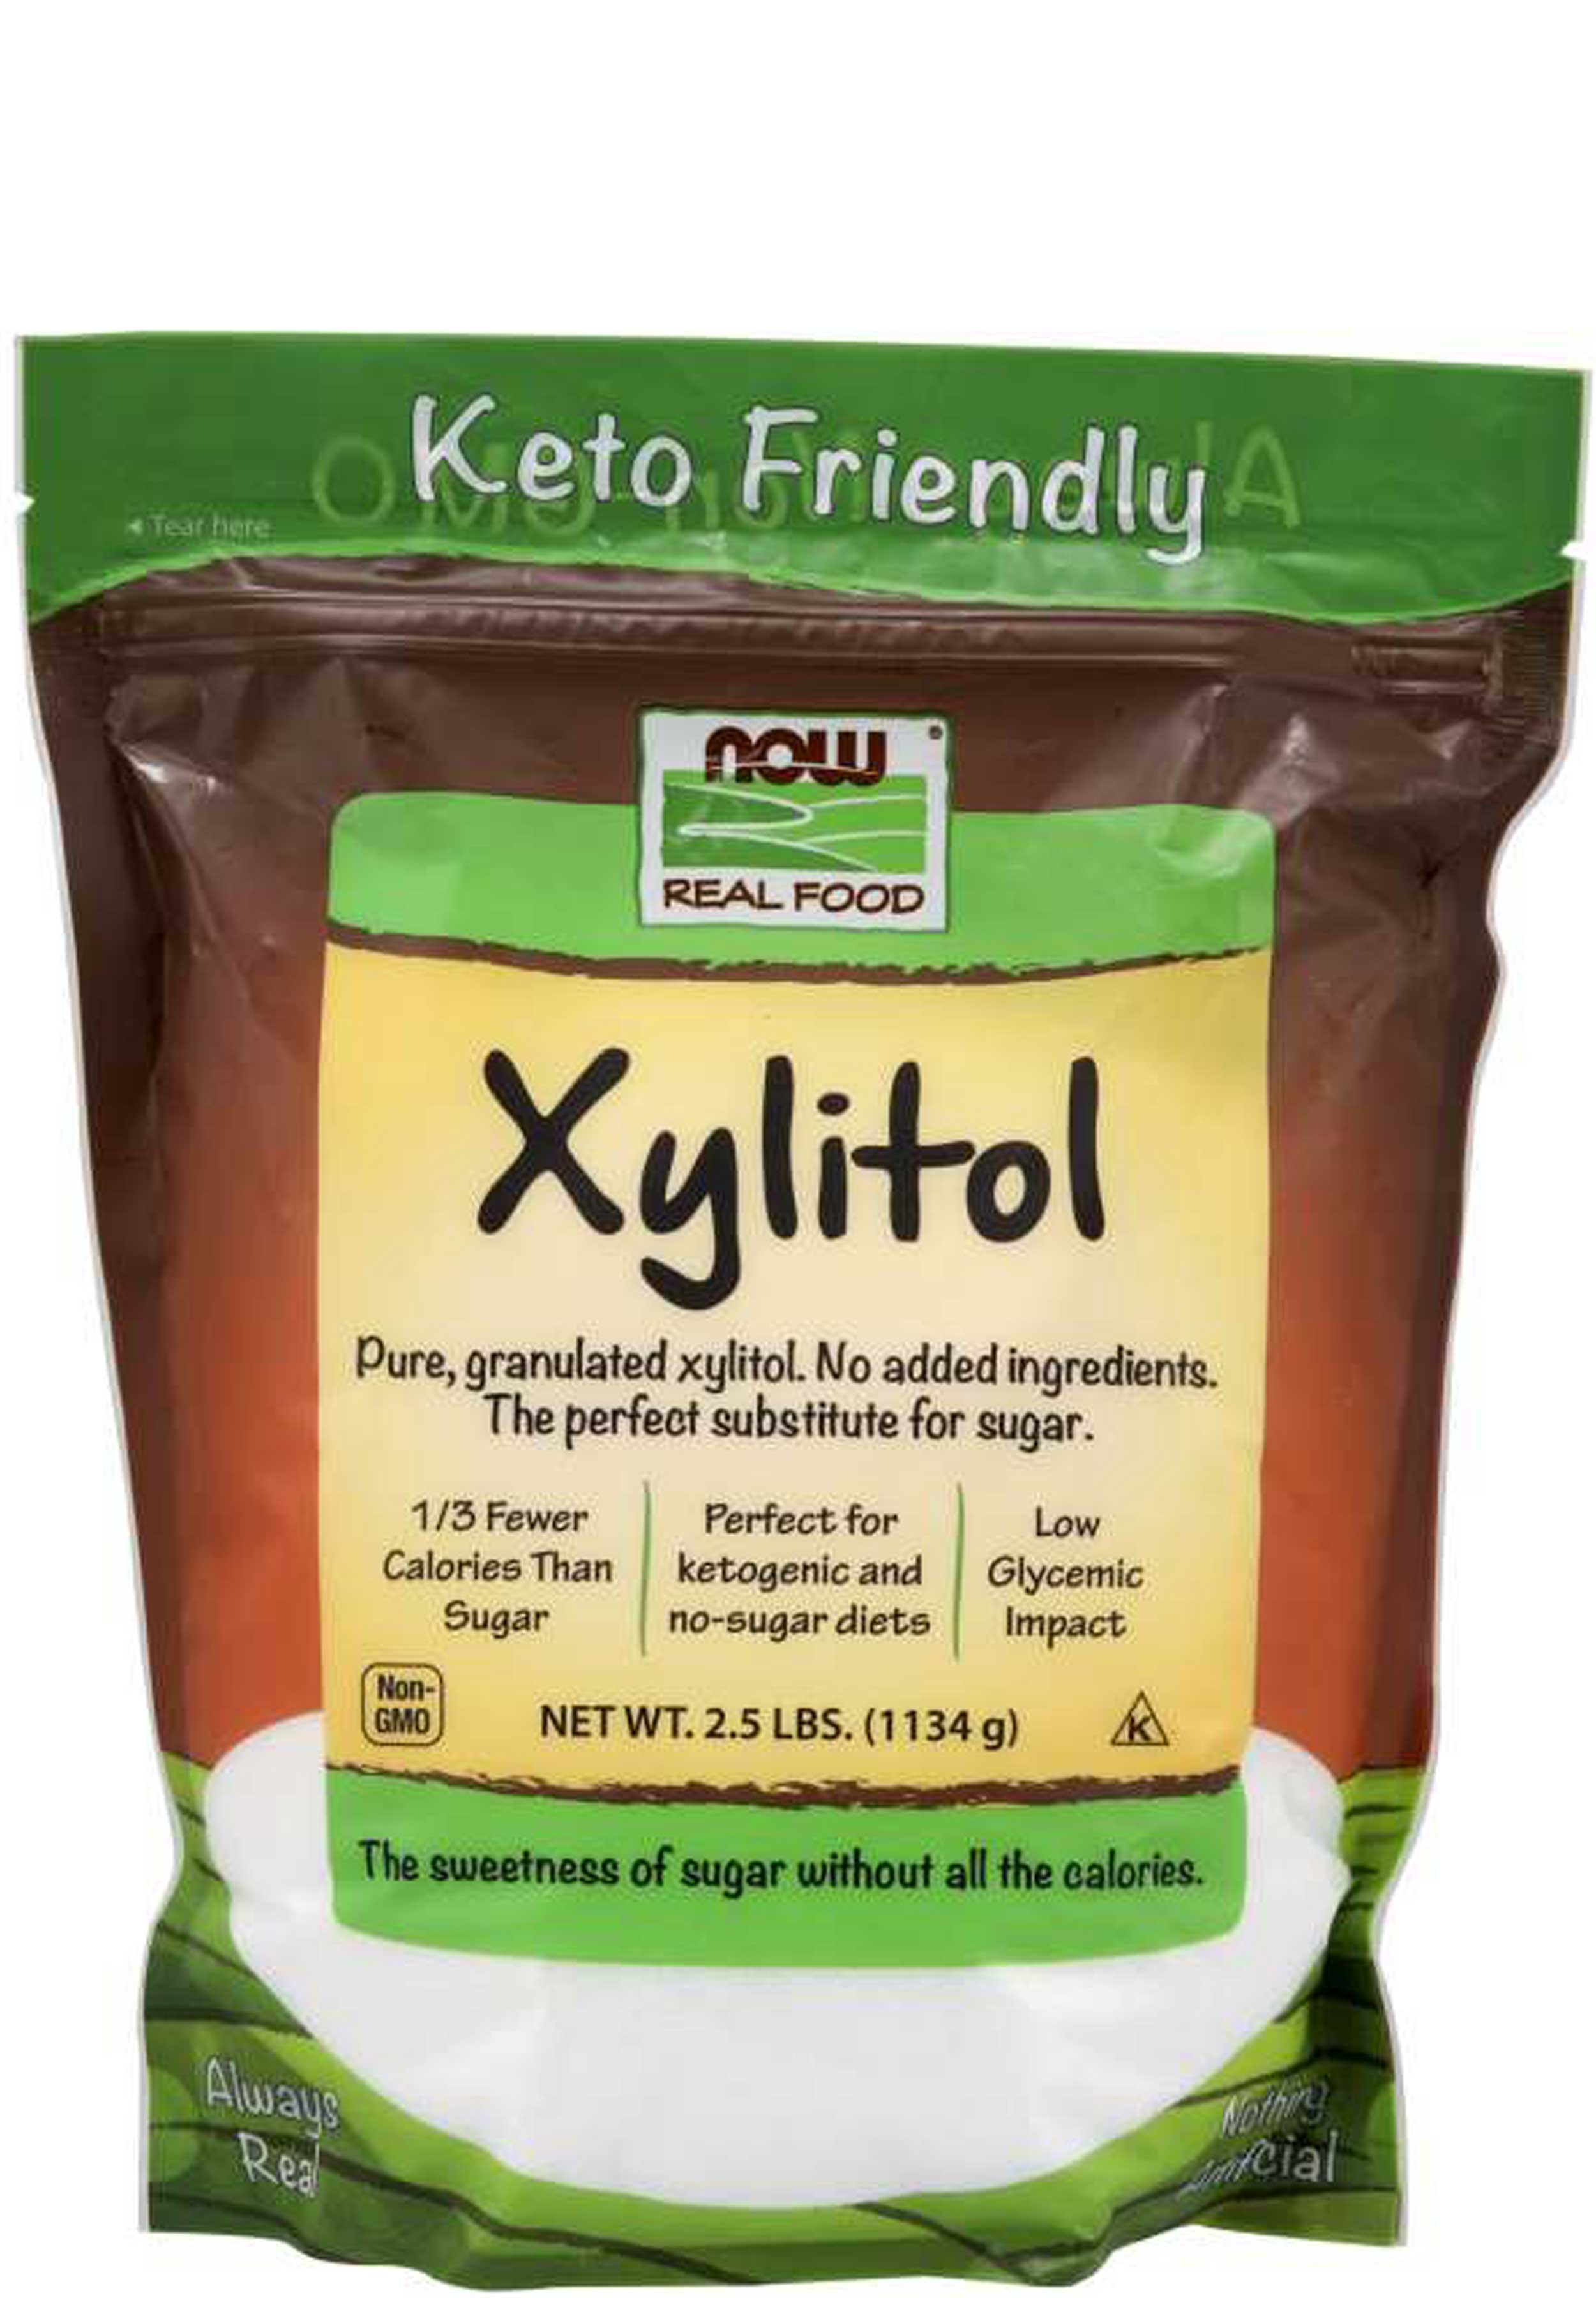 NOW Xylitol